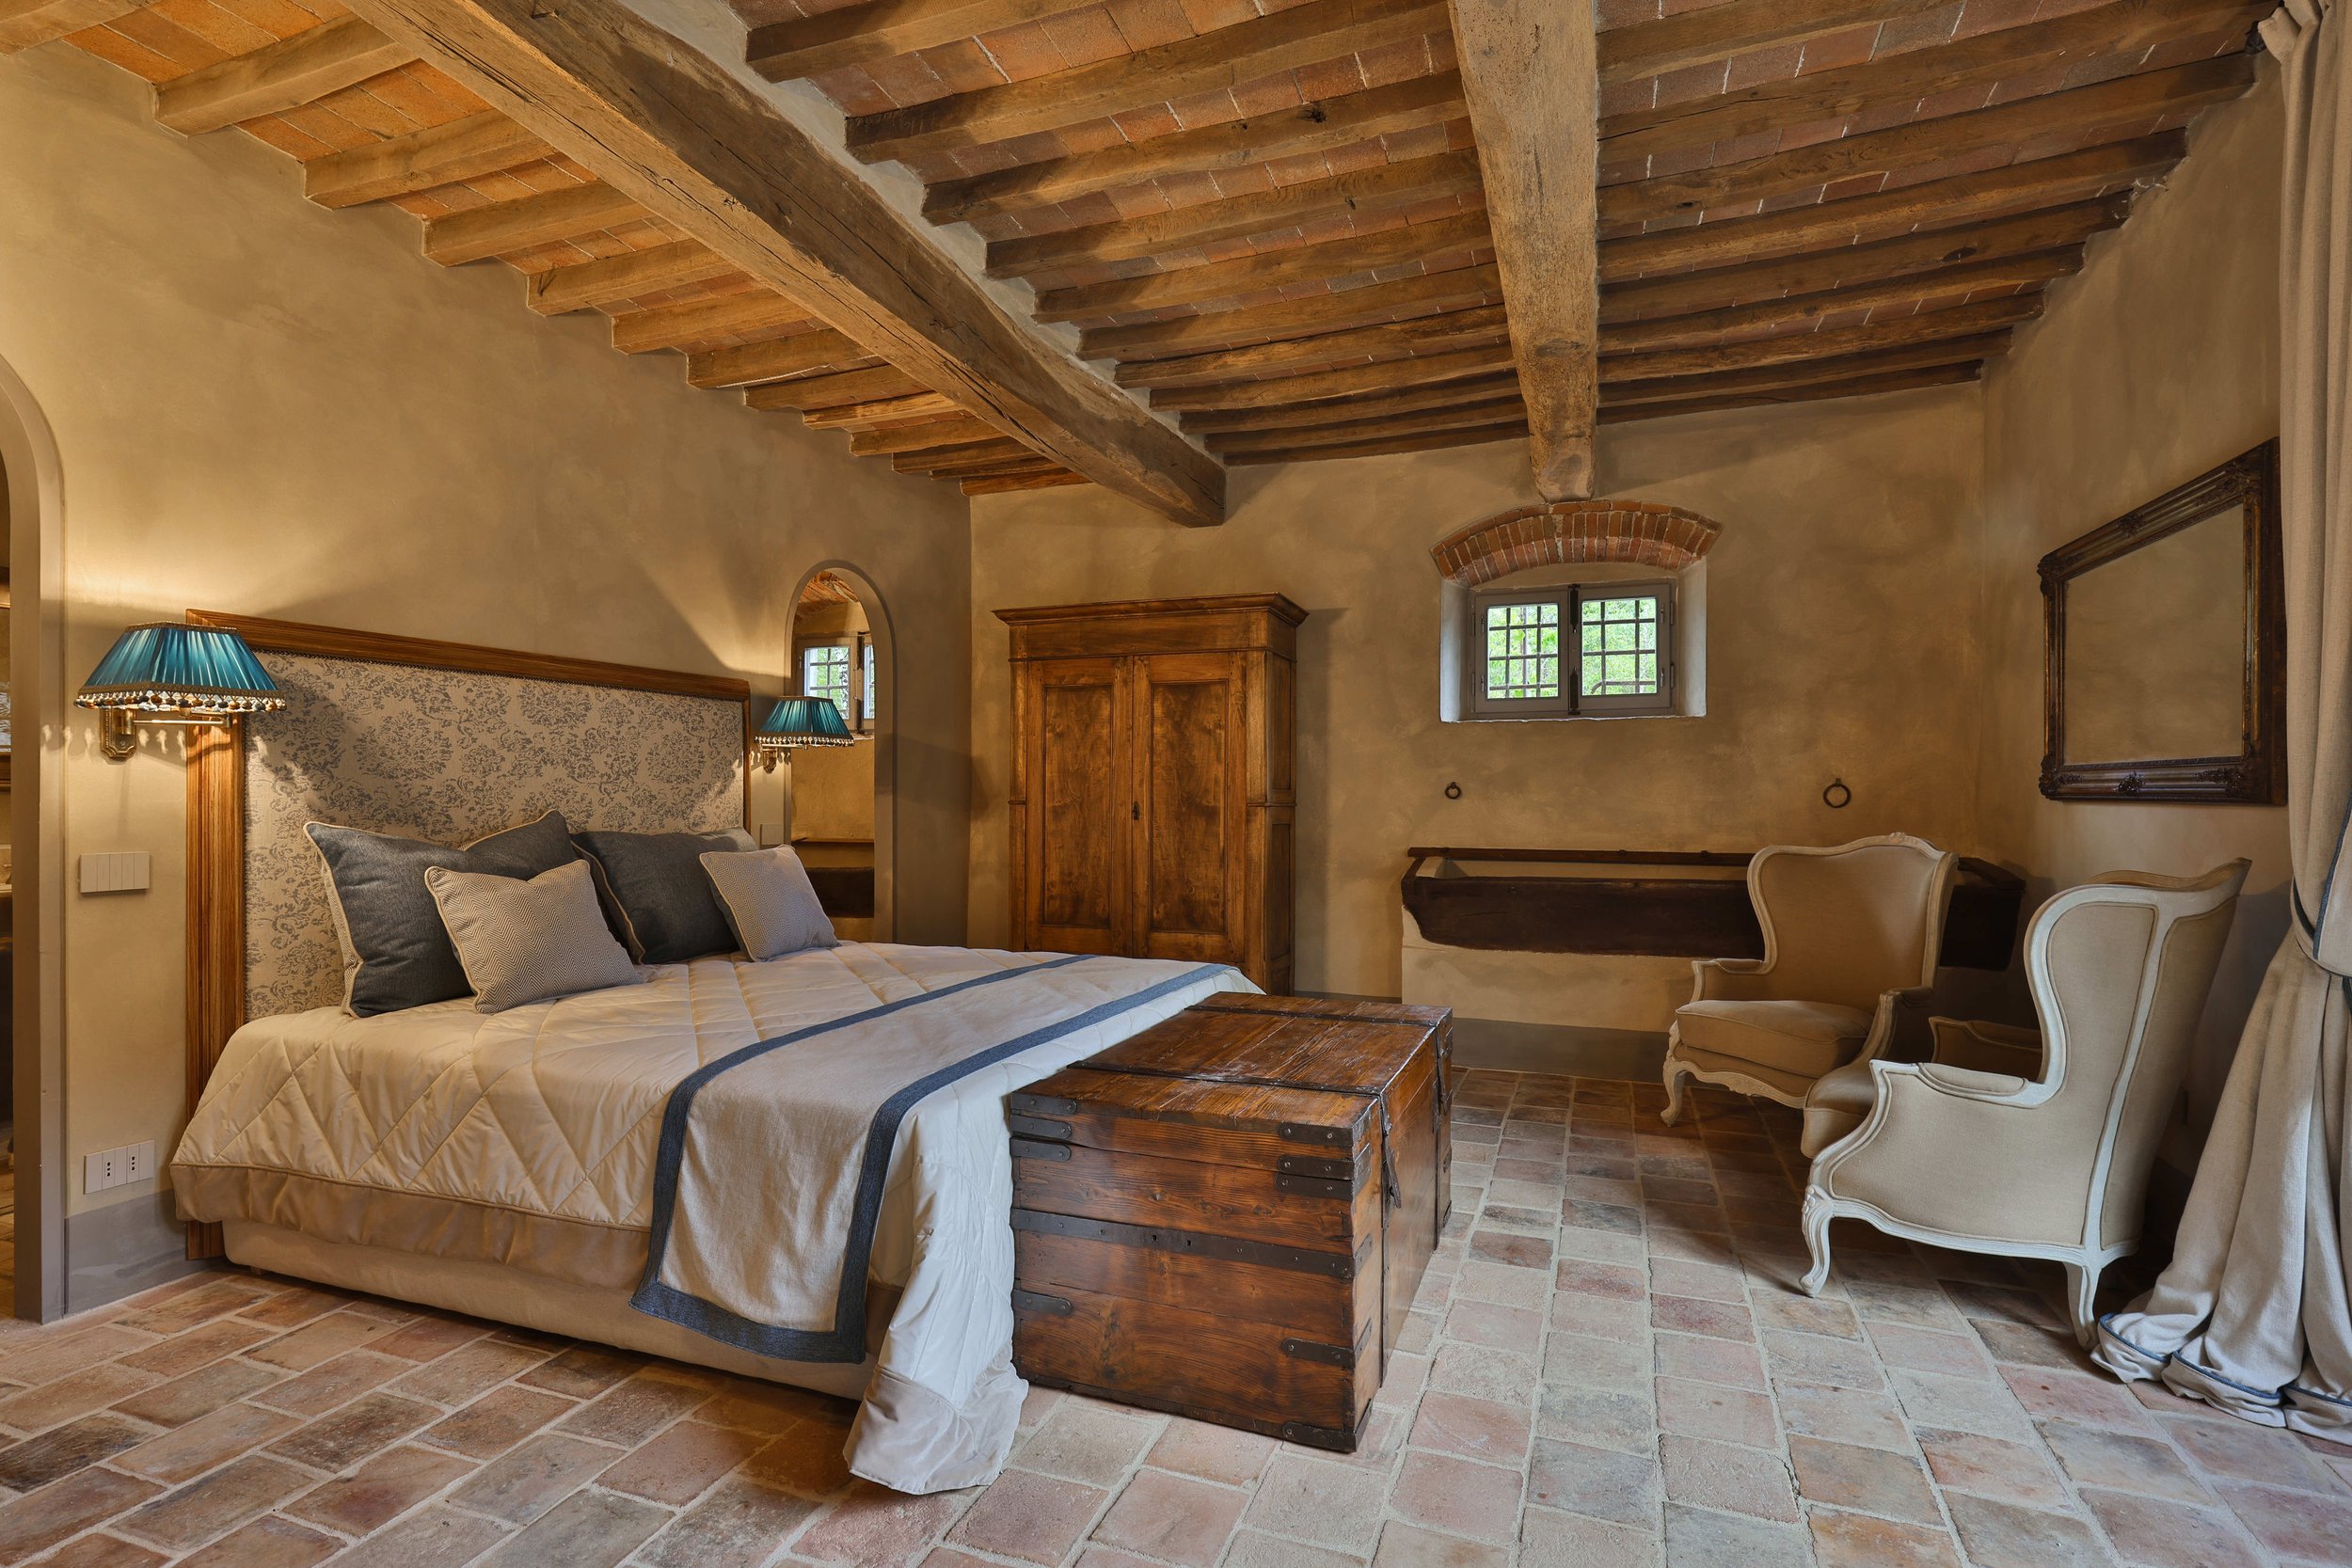 Francis York NEW Luxury Holiday Rental in the Chianti Hills, Tuscany Booking This Summer  30.jpg